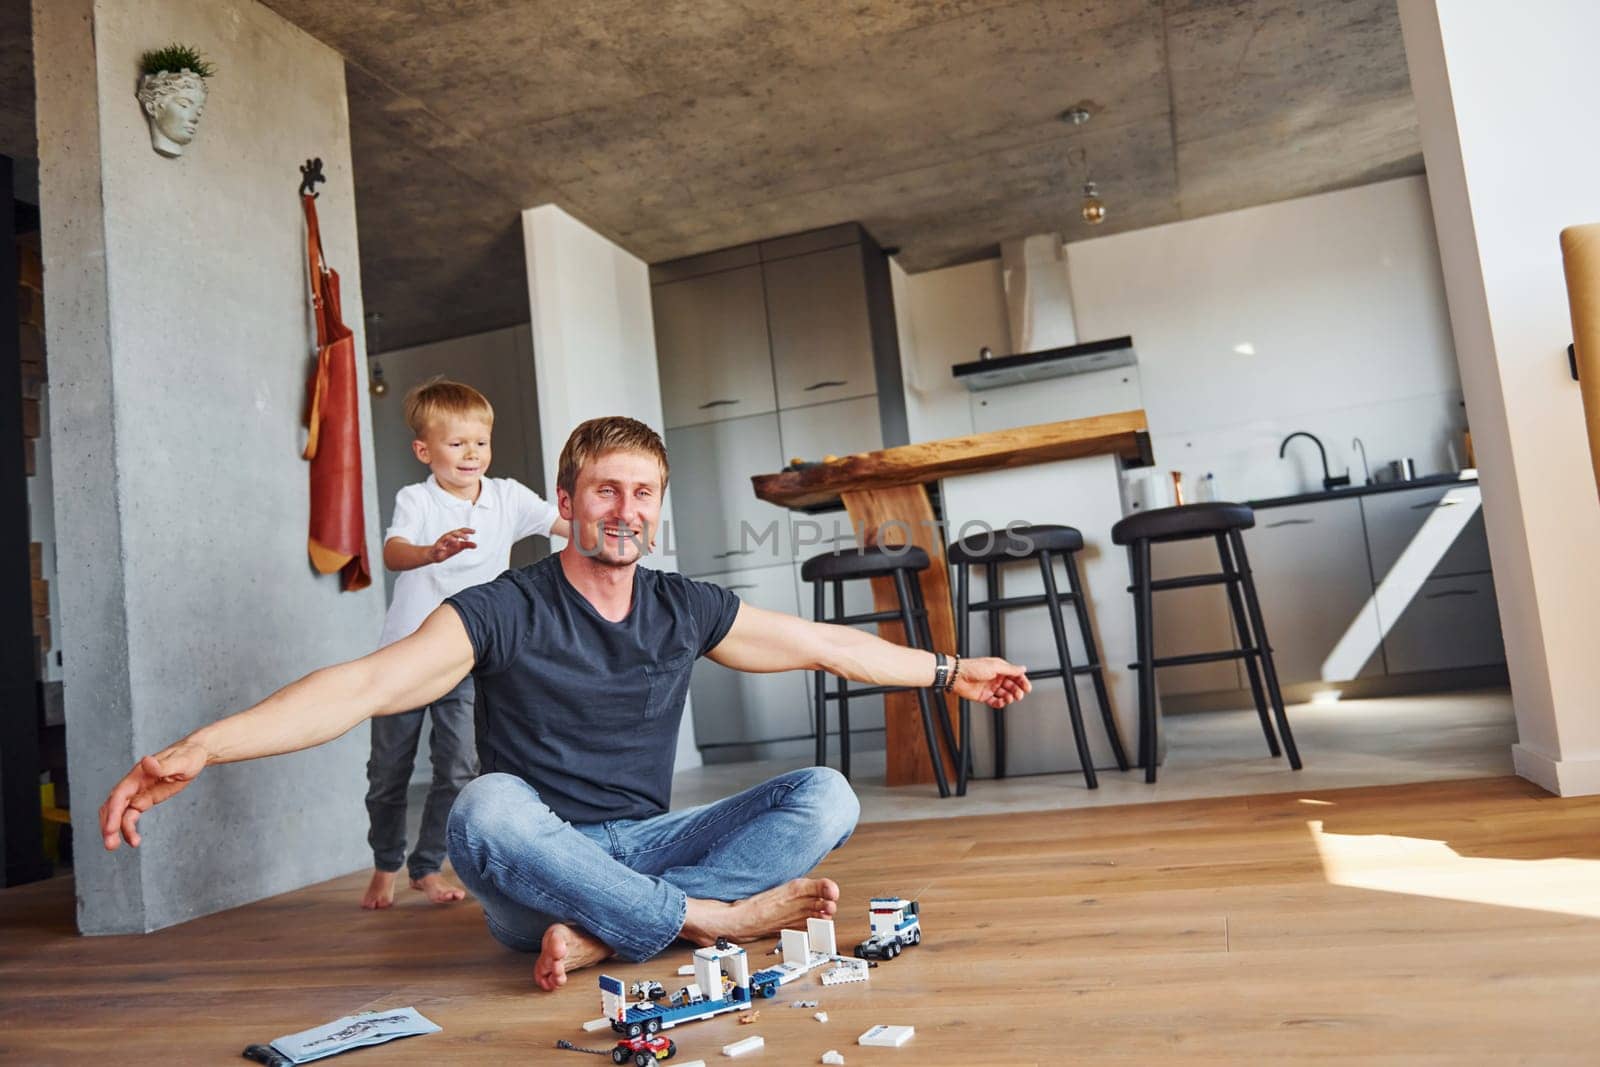 Sitting on the floor and playing with toys. Father and son is indoors at home together by Standret